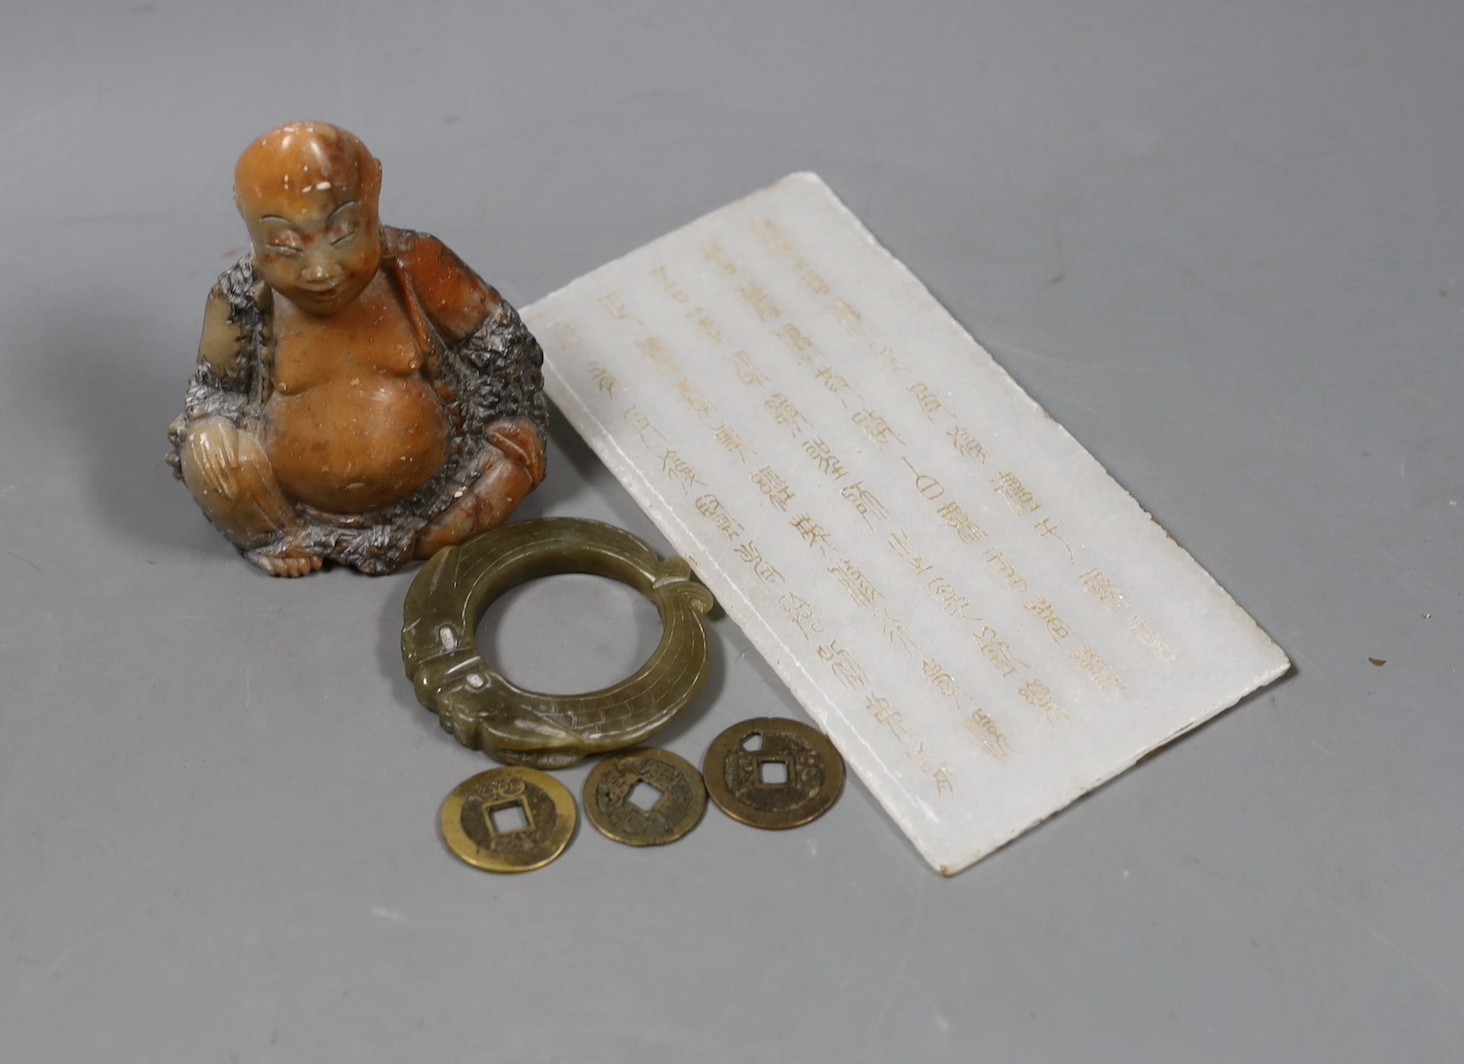 Assorted Chinese items to include a jade ring, coins, a stone inscribed plaque, 15.8 x 8cm and a soapstone figure